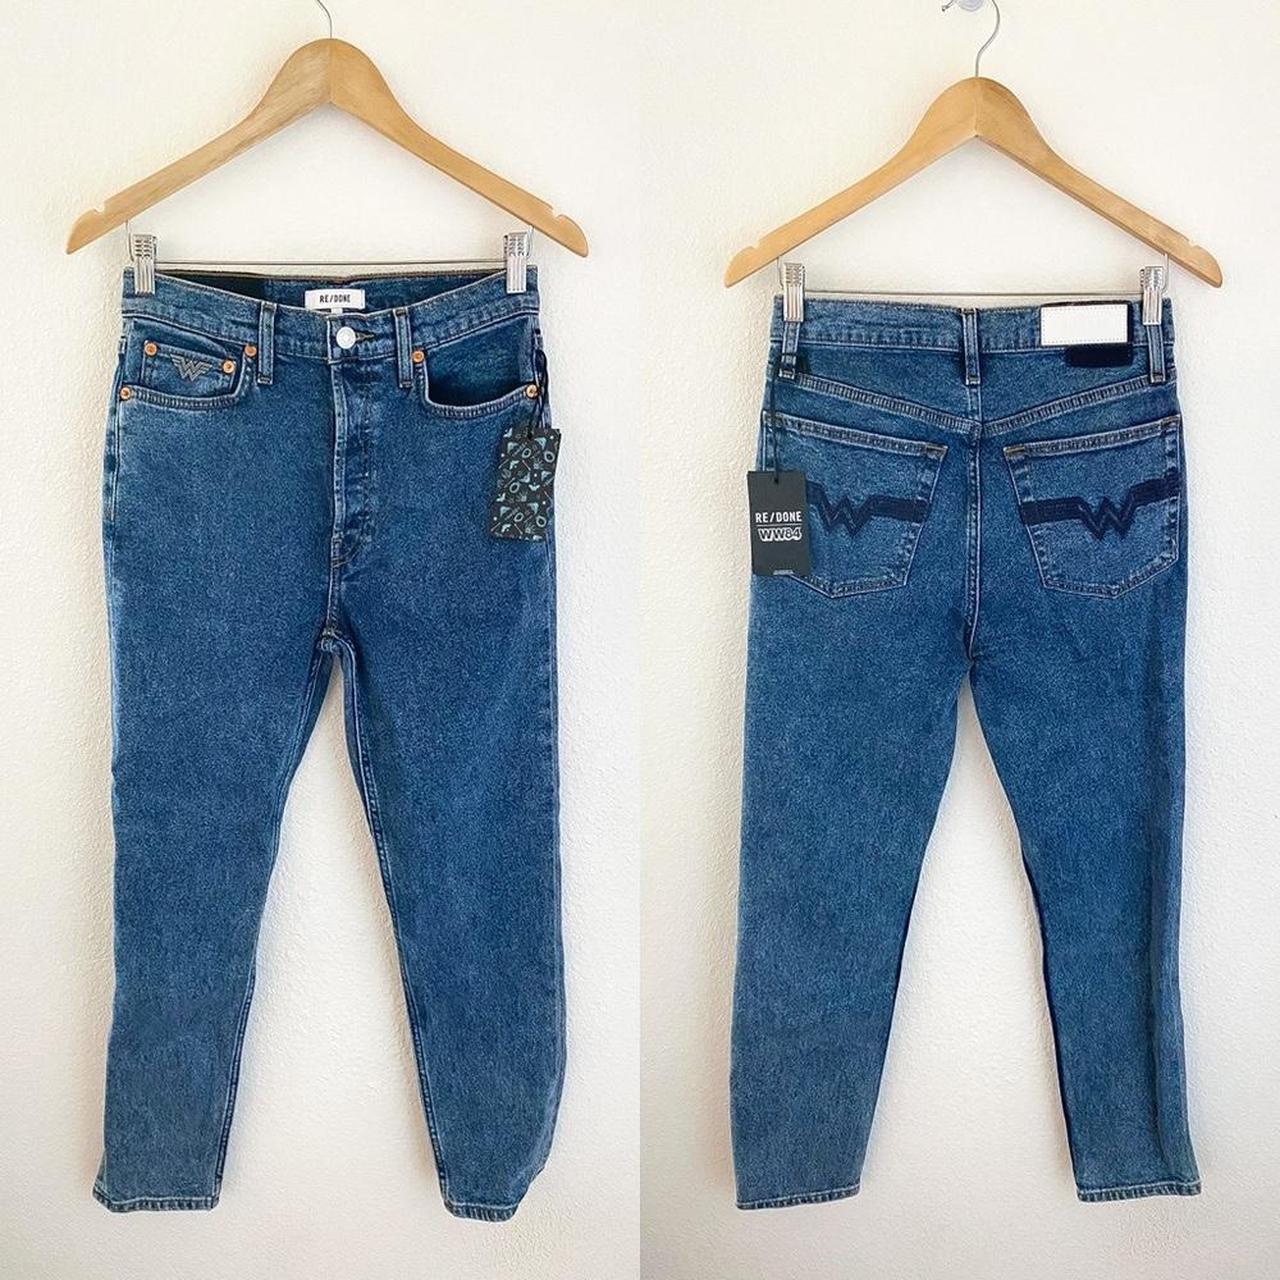 RE/DONE Women's Blue and Navy Jeans (2)